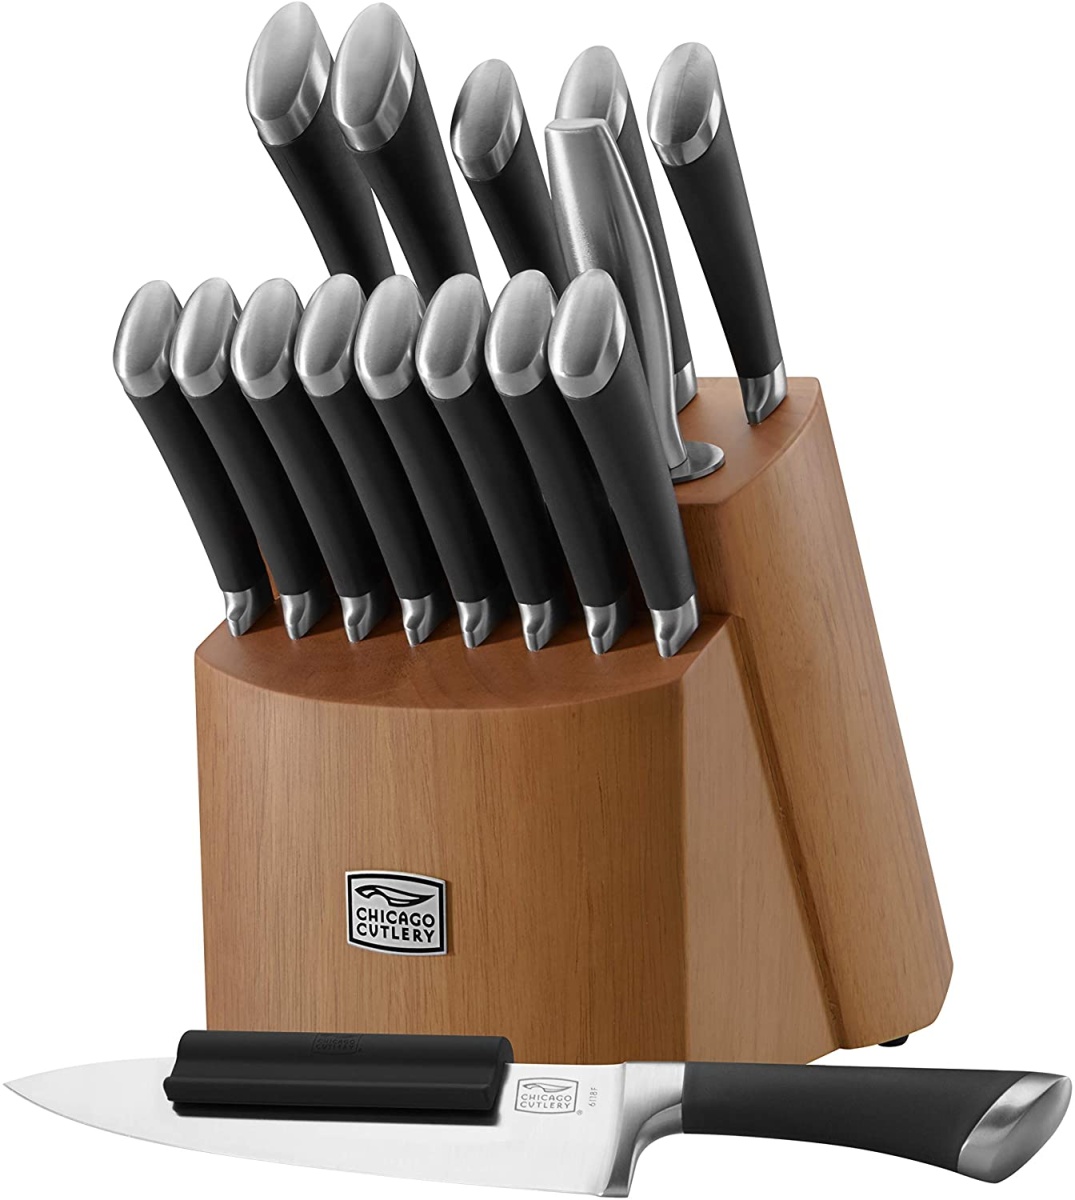 Chicago Cutlery Fusion 17 Piece Review